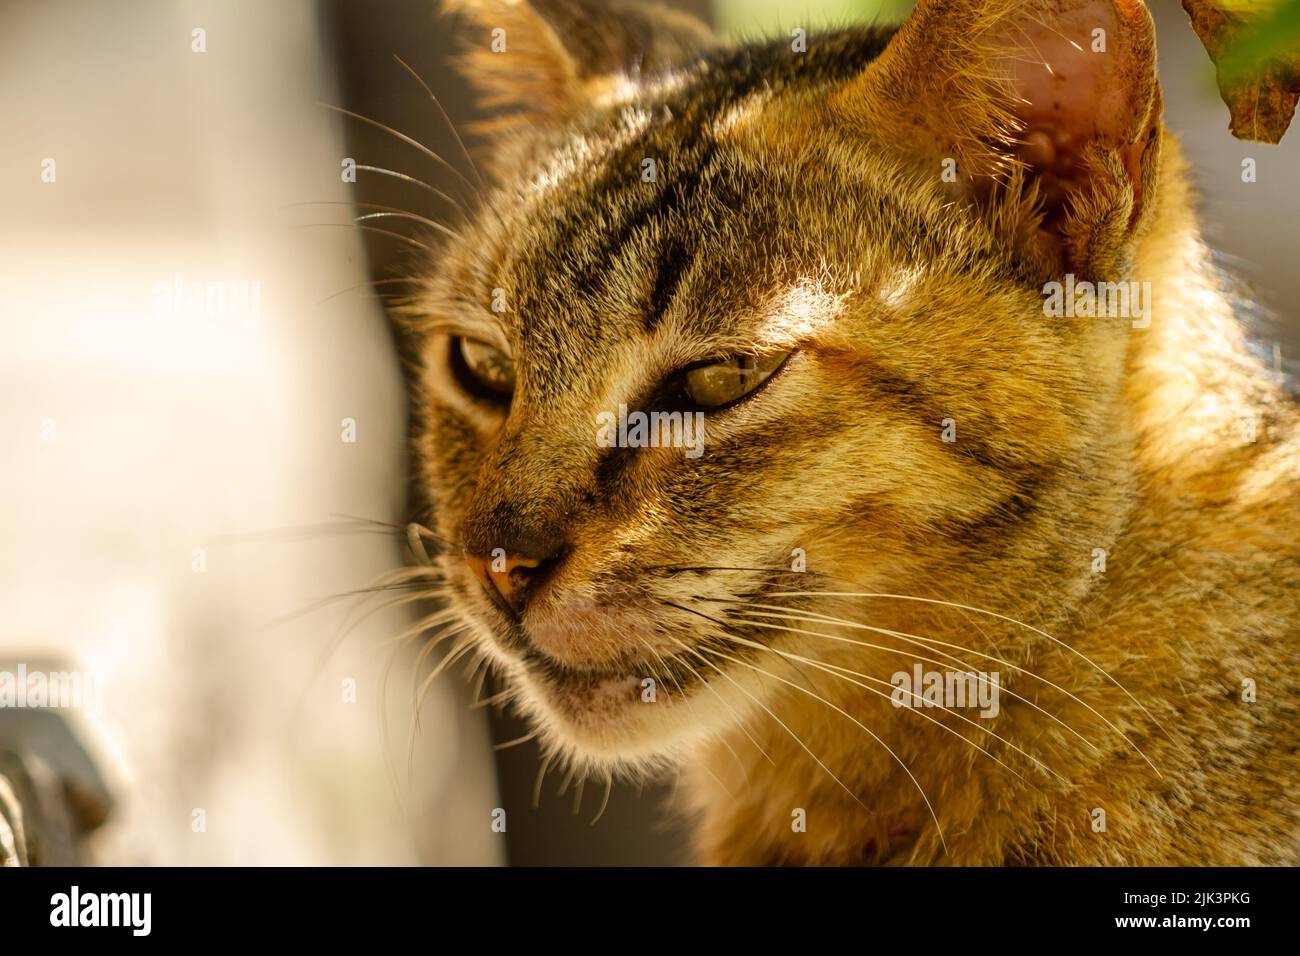 Close up A cat with a combination of black, orange, and brown colors, a pet that is trending in Muslim society Stock Photo